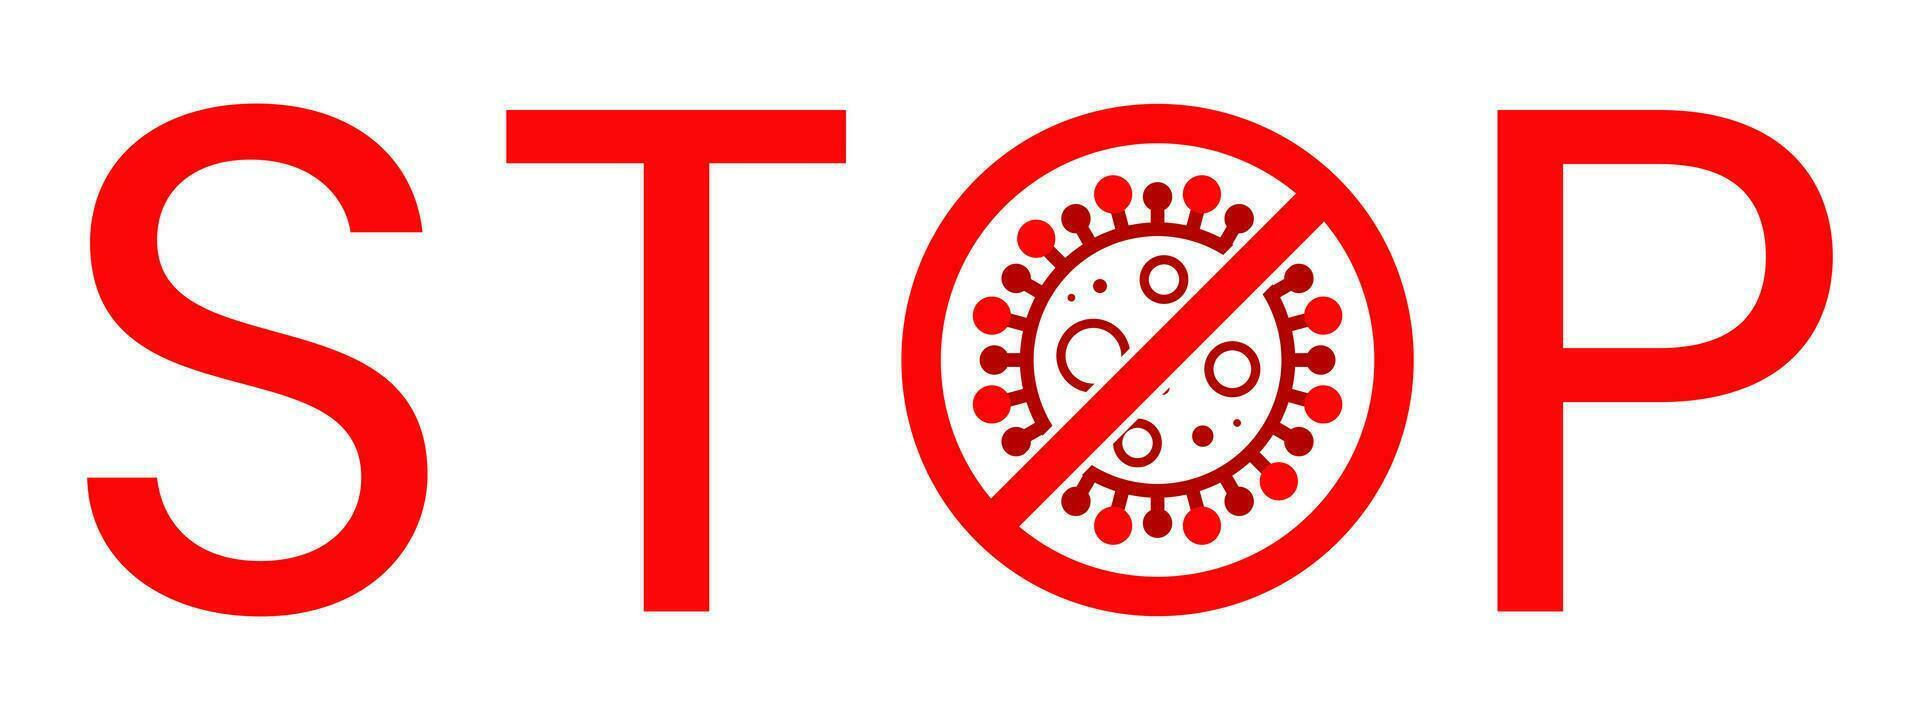 Stop Text Warning Sign With Virus Cell inside. Block Stamp. Red Vector. Protection Symbol, Risk Zone for Disease or Pandemic. vector